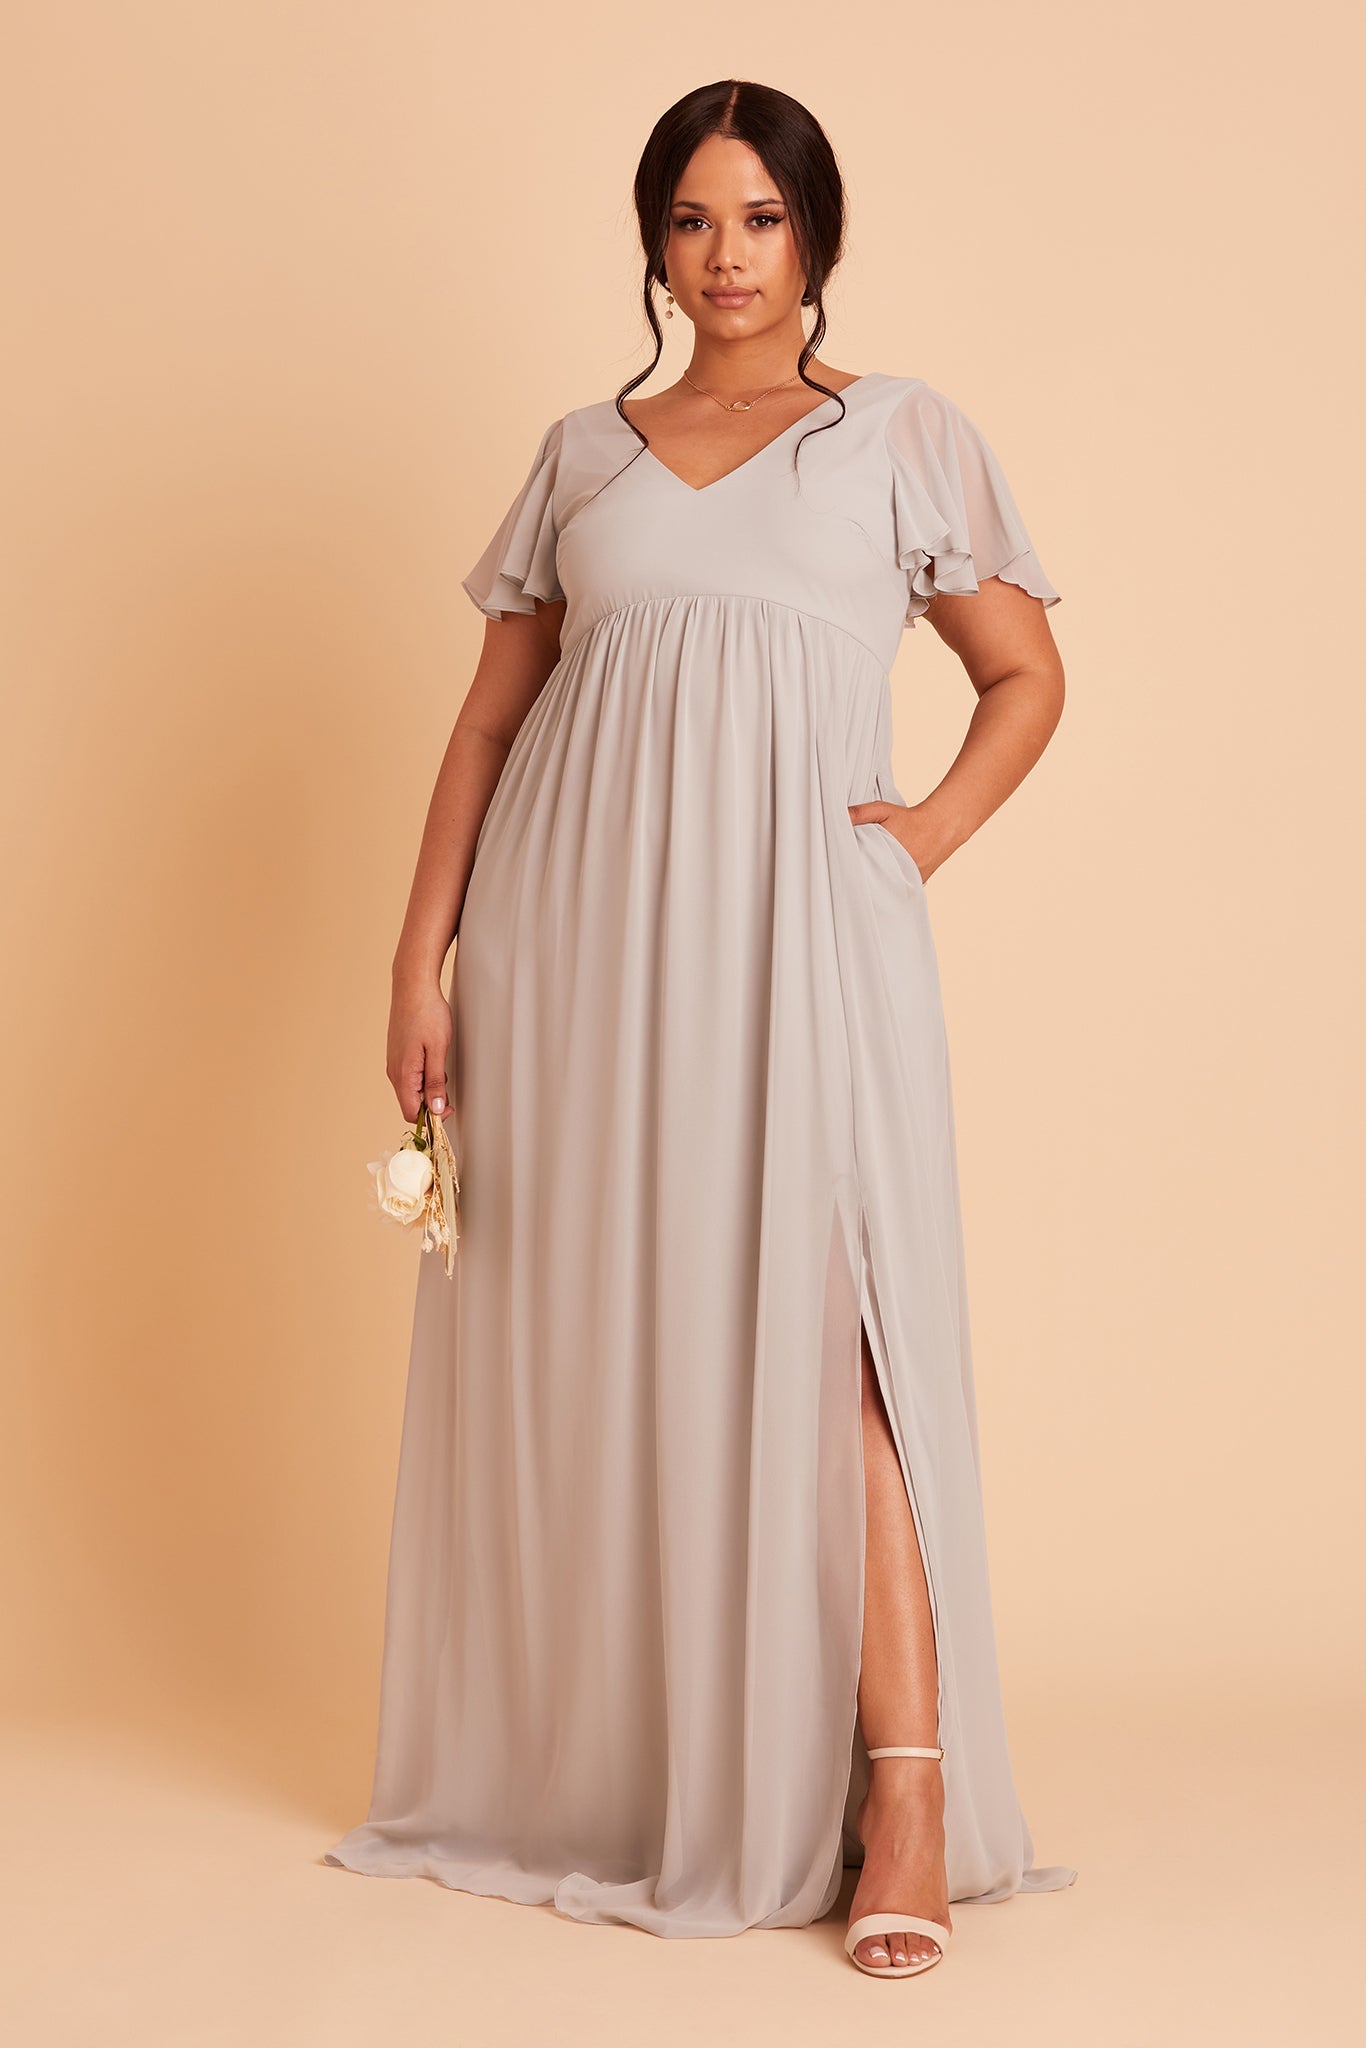 Hannah empire plus size bridesmaid dress in dove gray chiffon by Birdy Grey, front view, hand in pocket